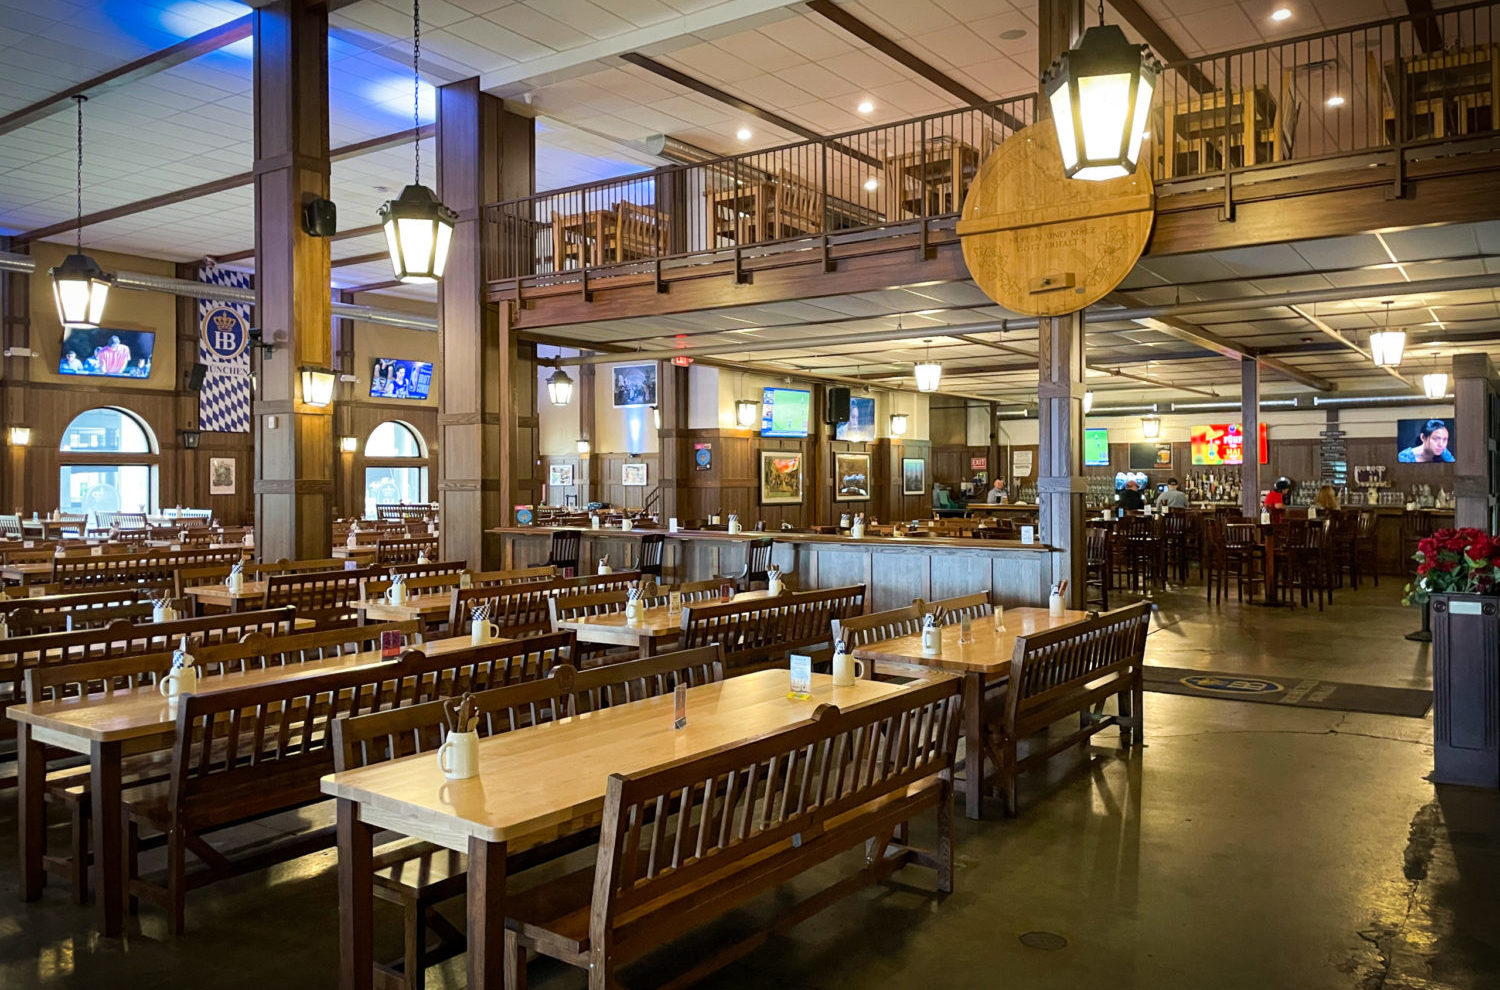 Experience The Bier Hall